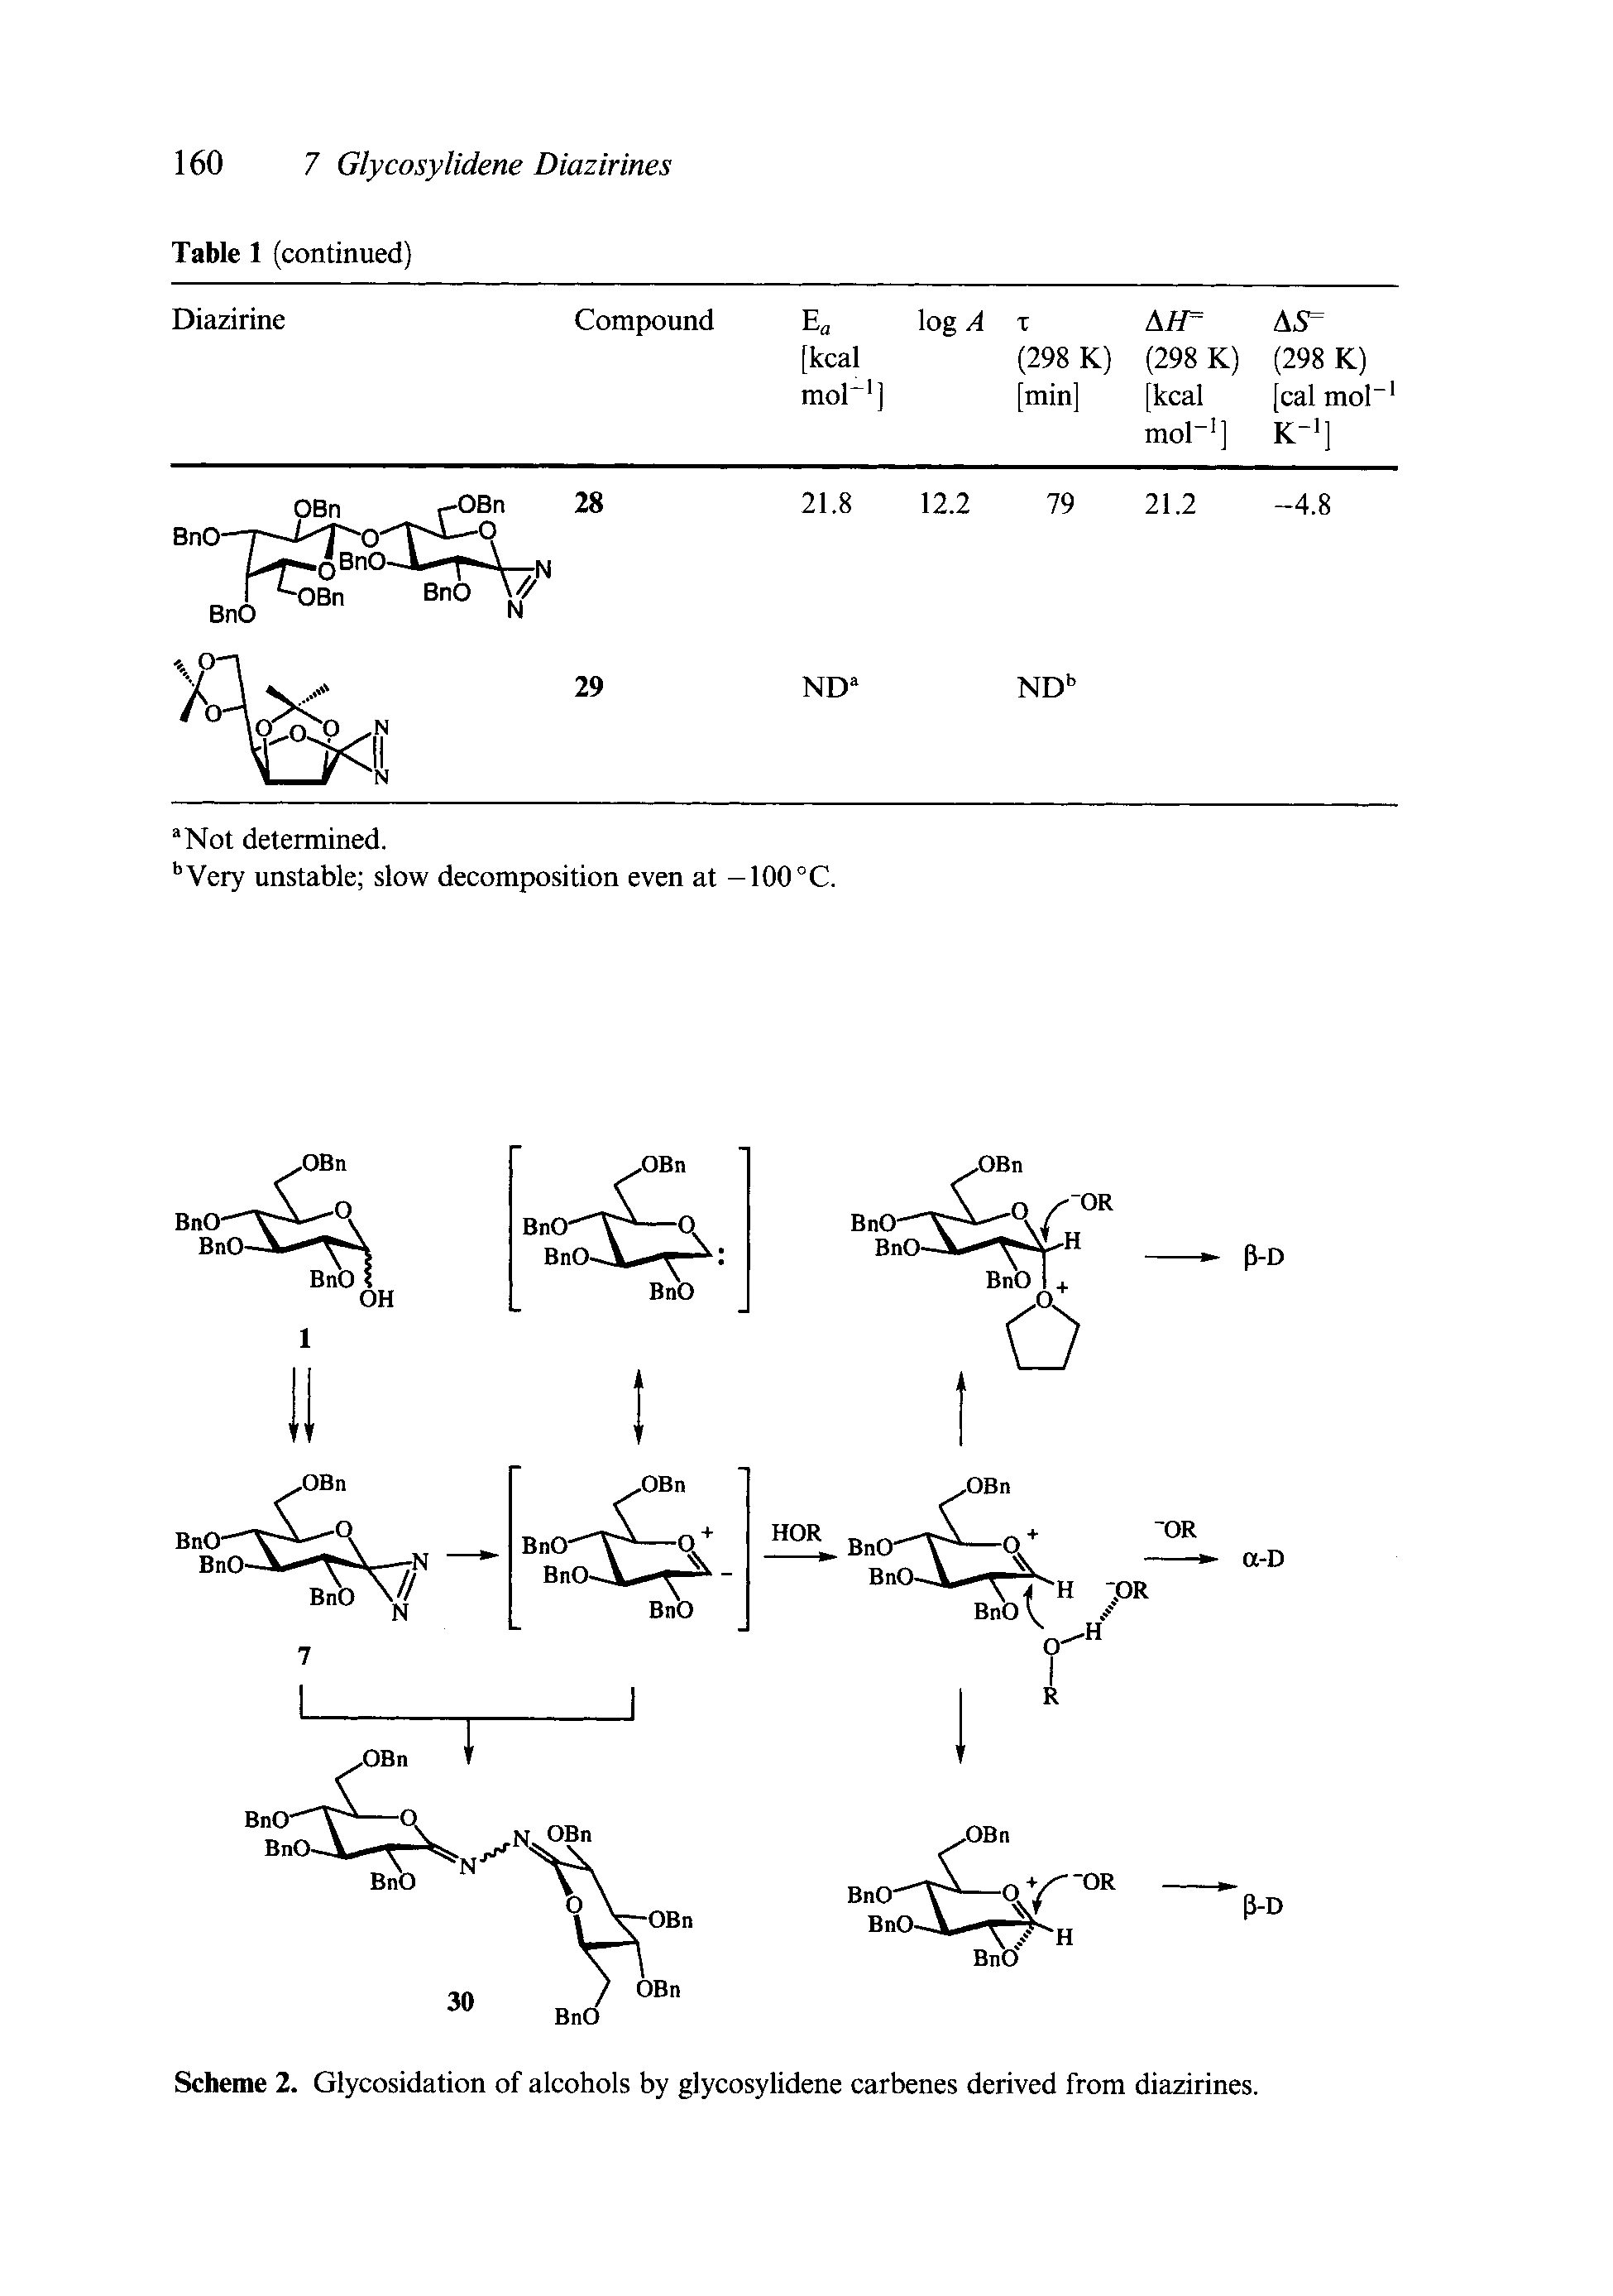 Scheme 2. Glycosidation of alcohols by glycosylidene carbenes derived from diazirines.